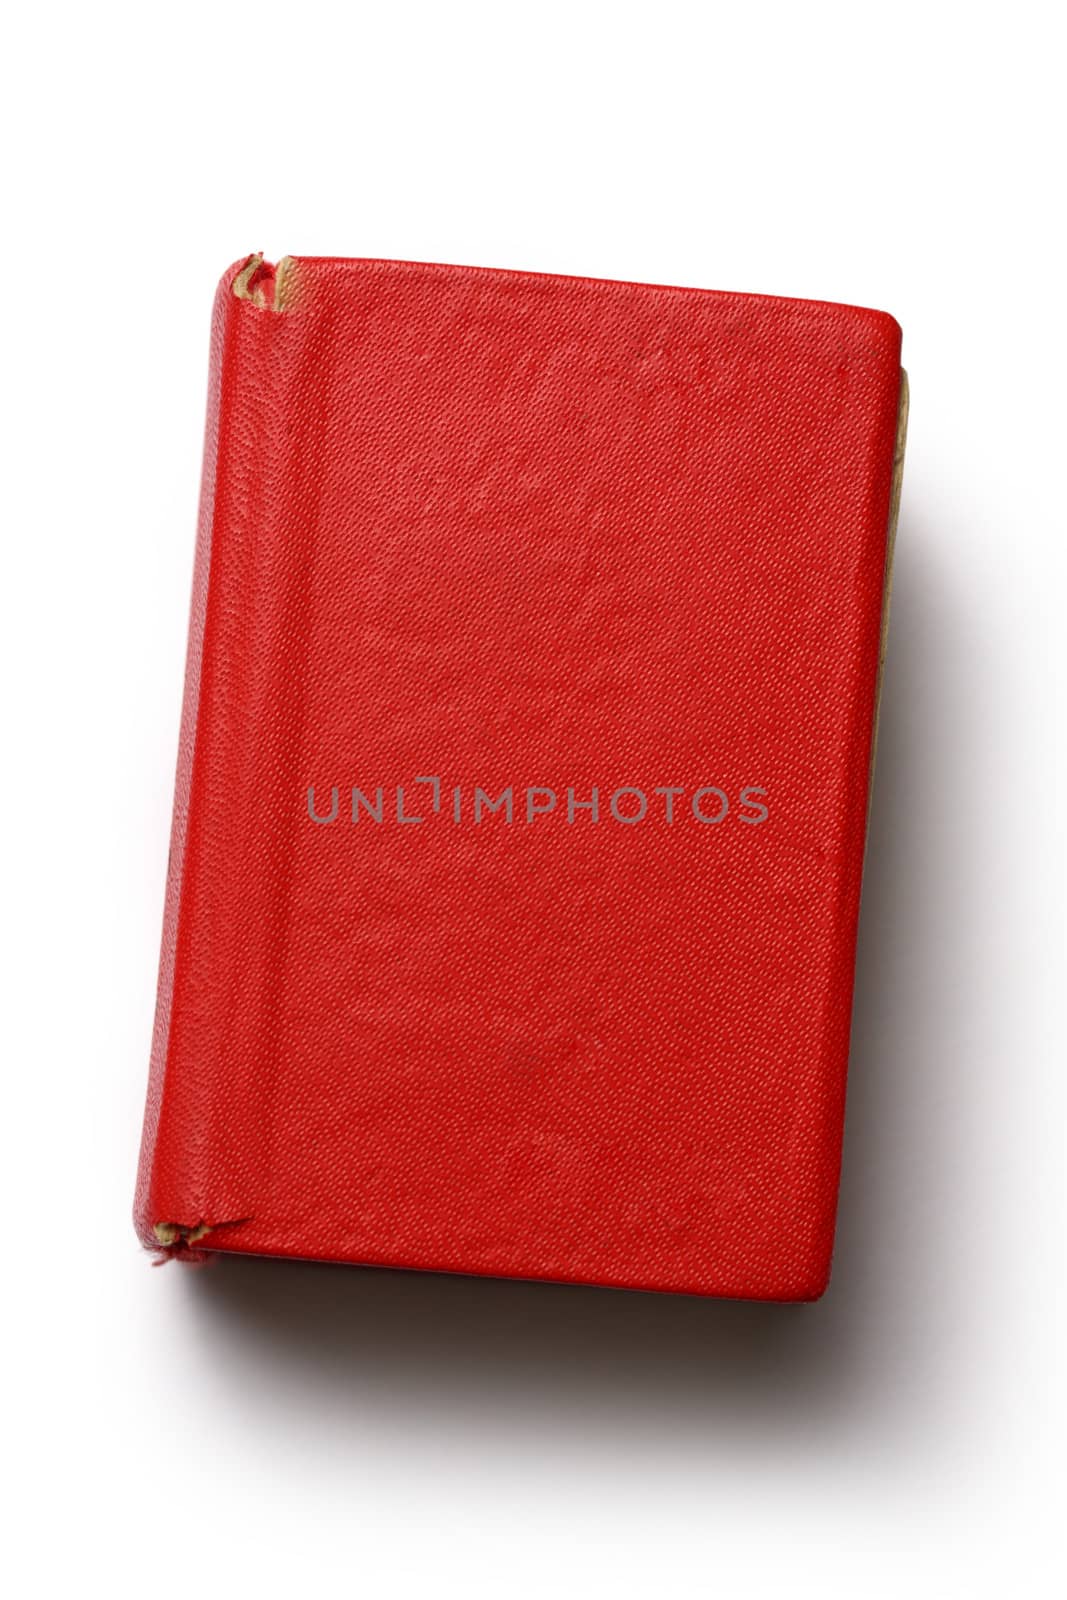 Old red book on white background by Garsya